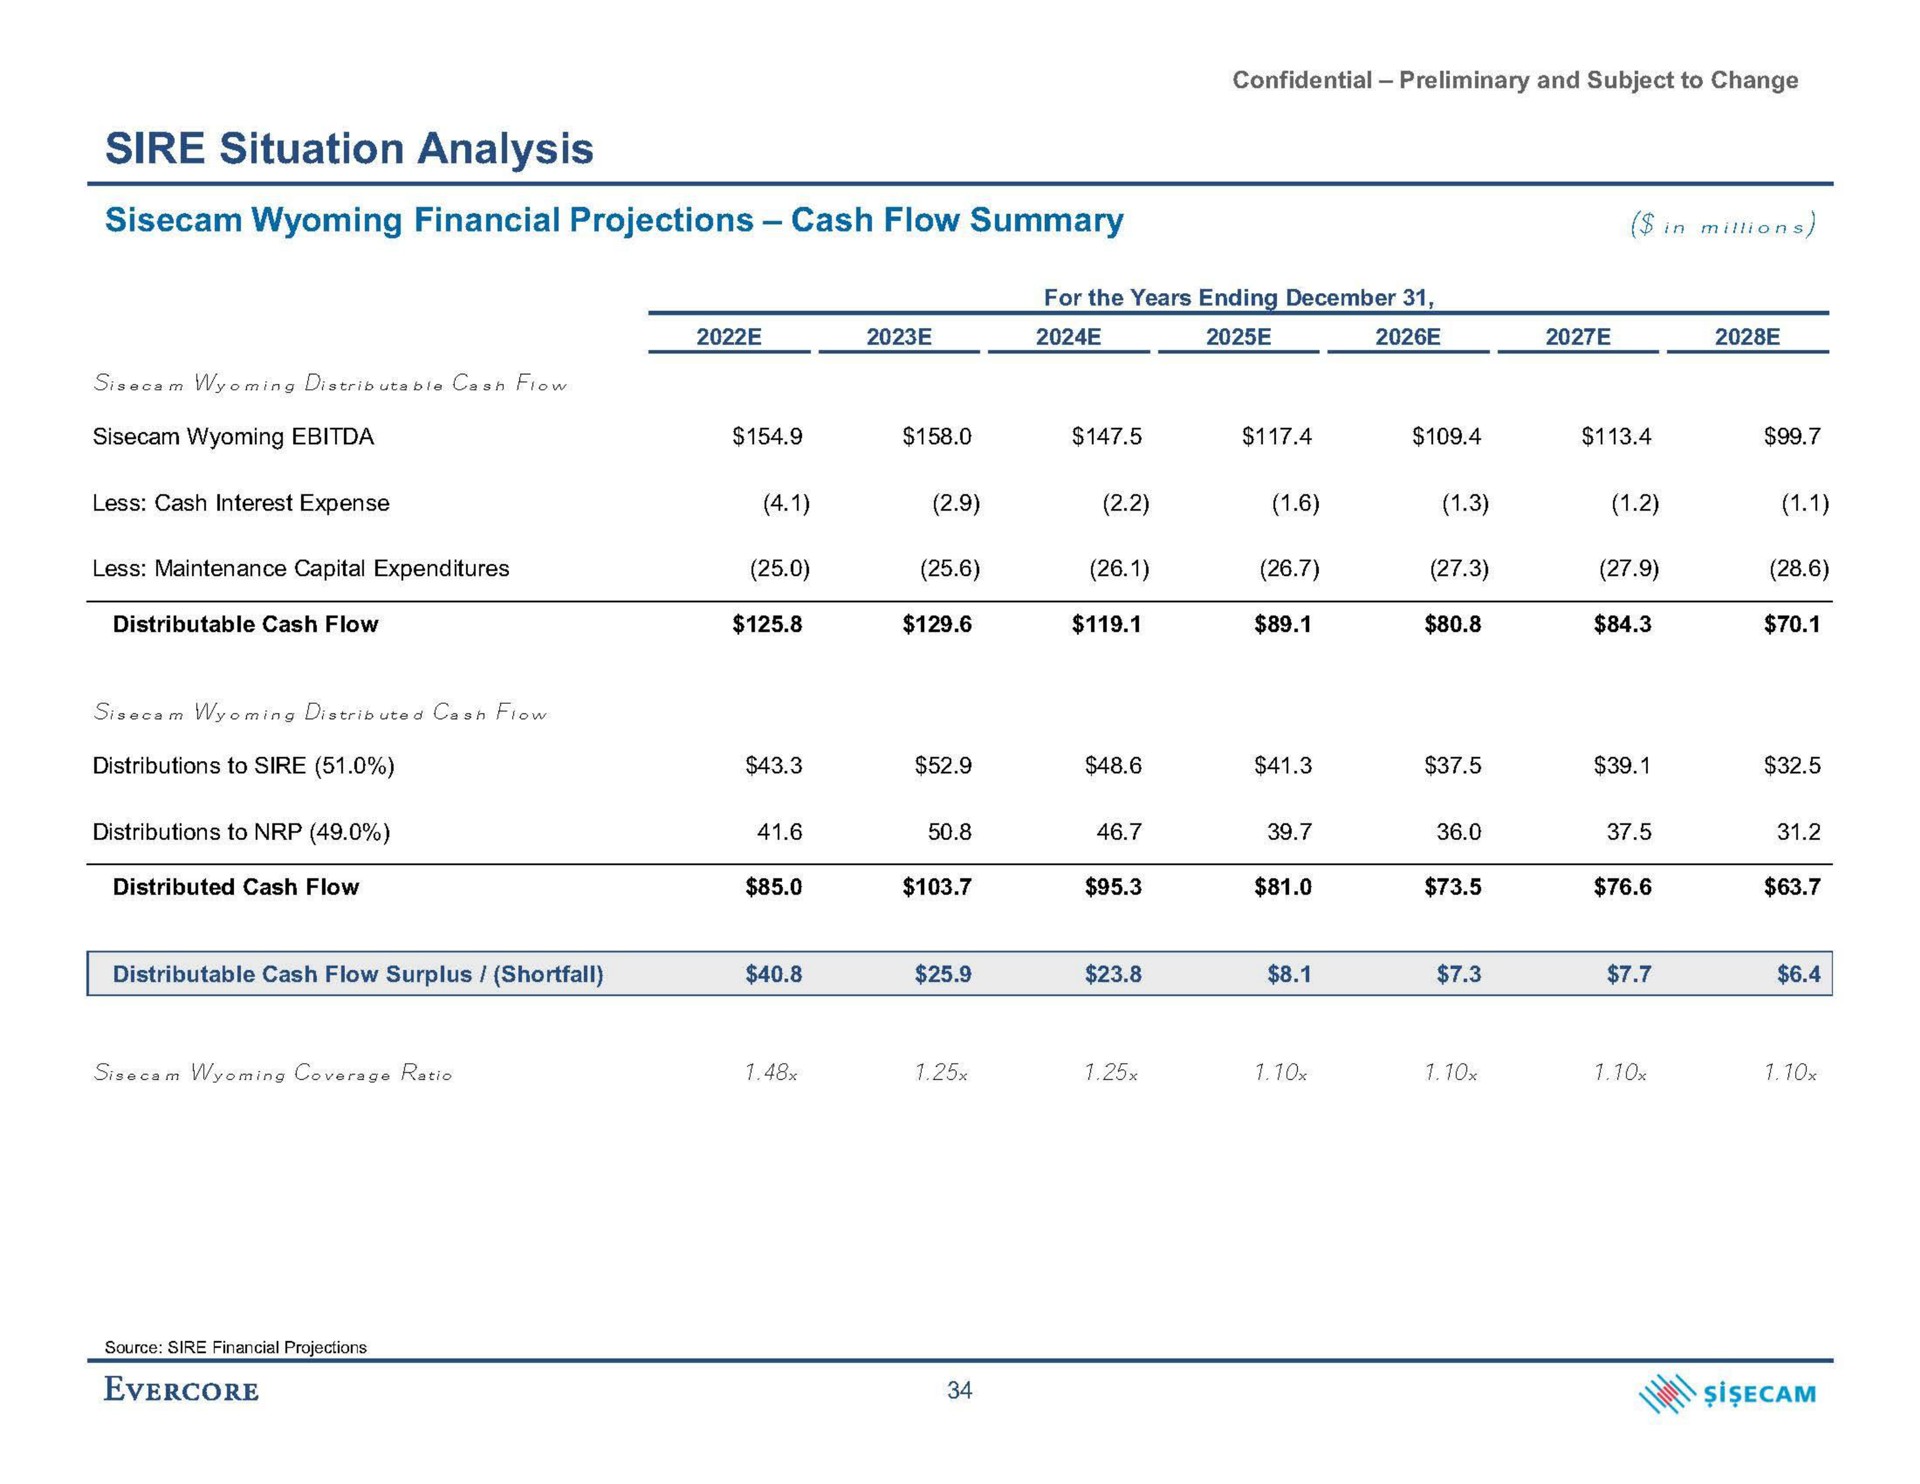 sire situation analysis financial projections cash flow summary in minions | Evercore